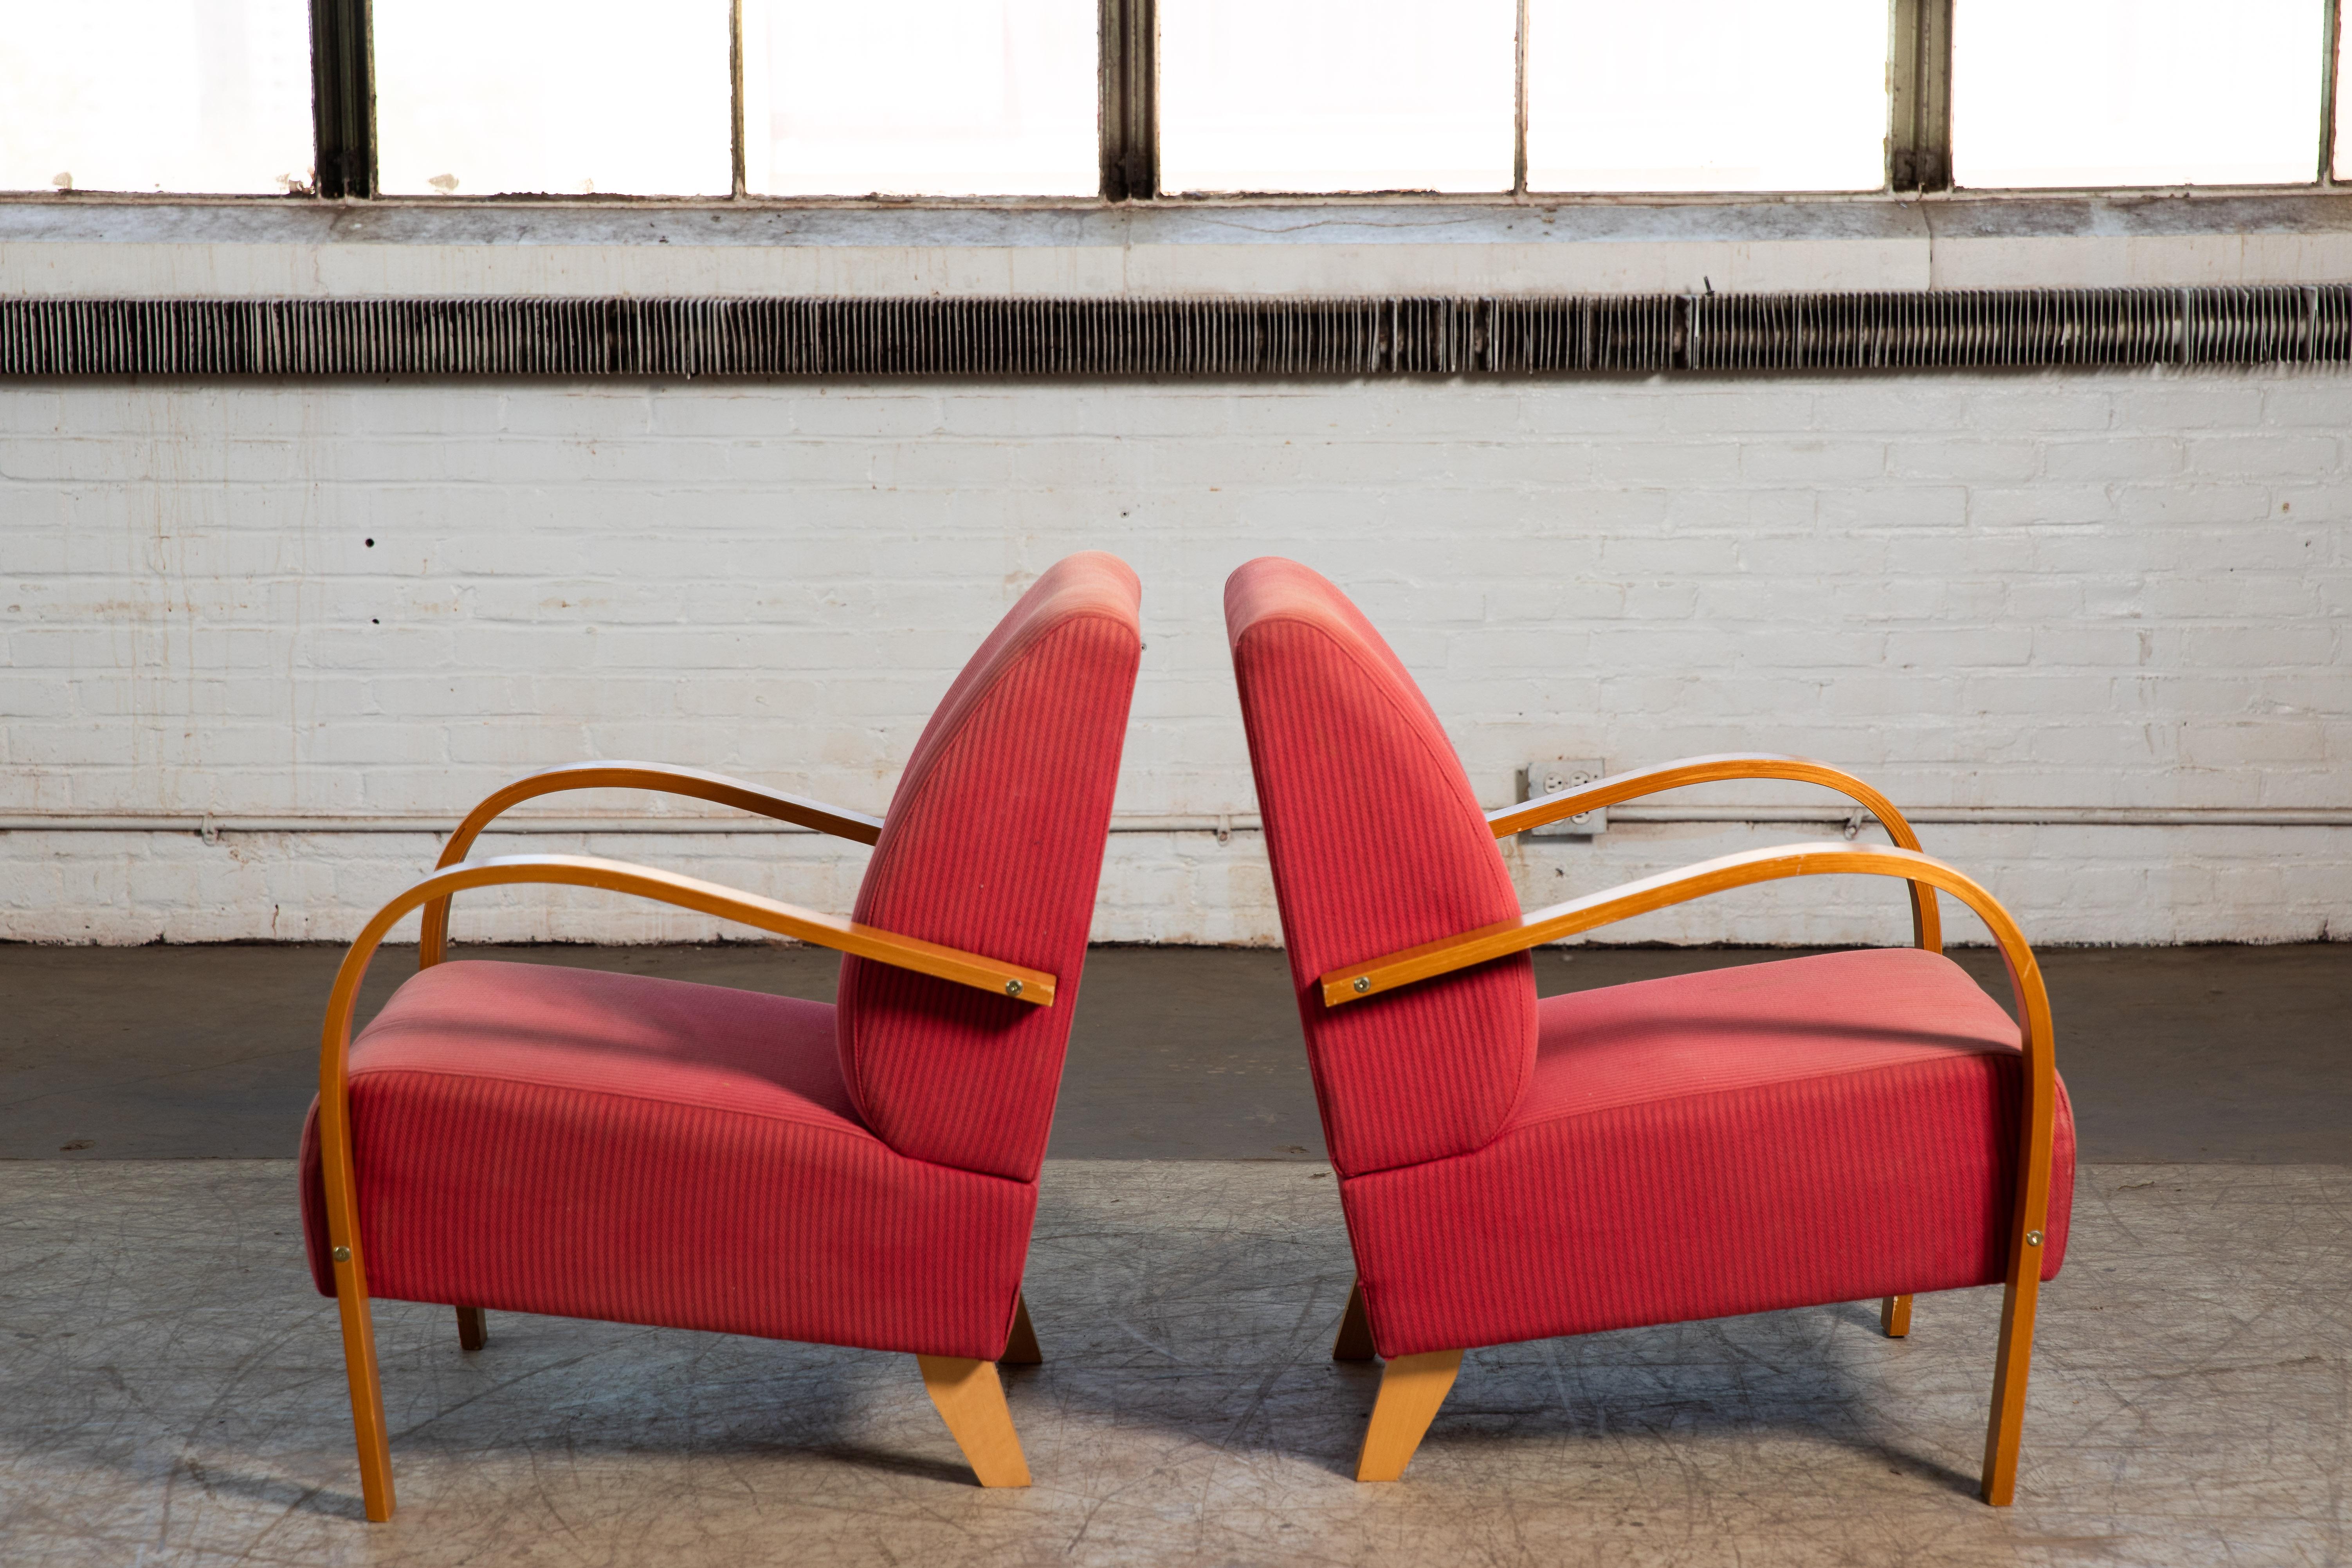 Pair of Danish Early Midcentury or Art Deco Style Low Lounge Chairs  1